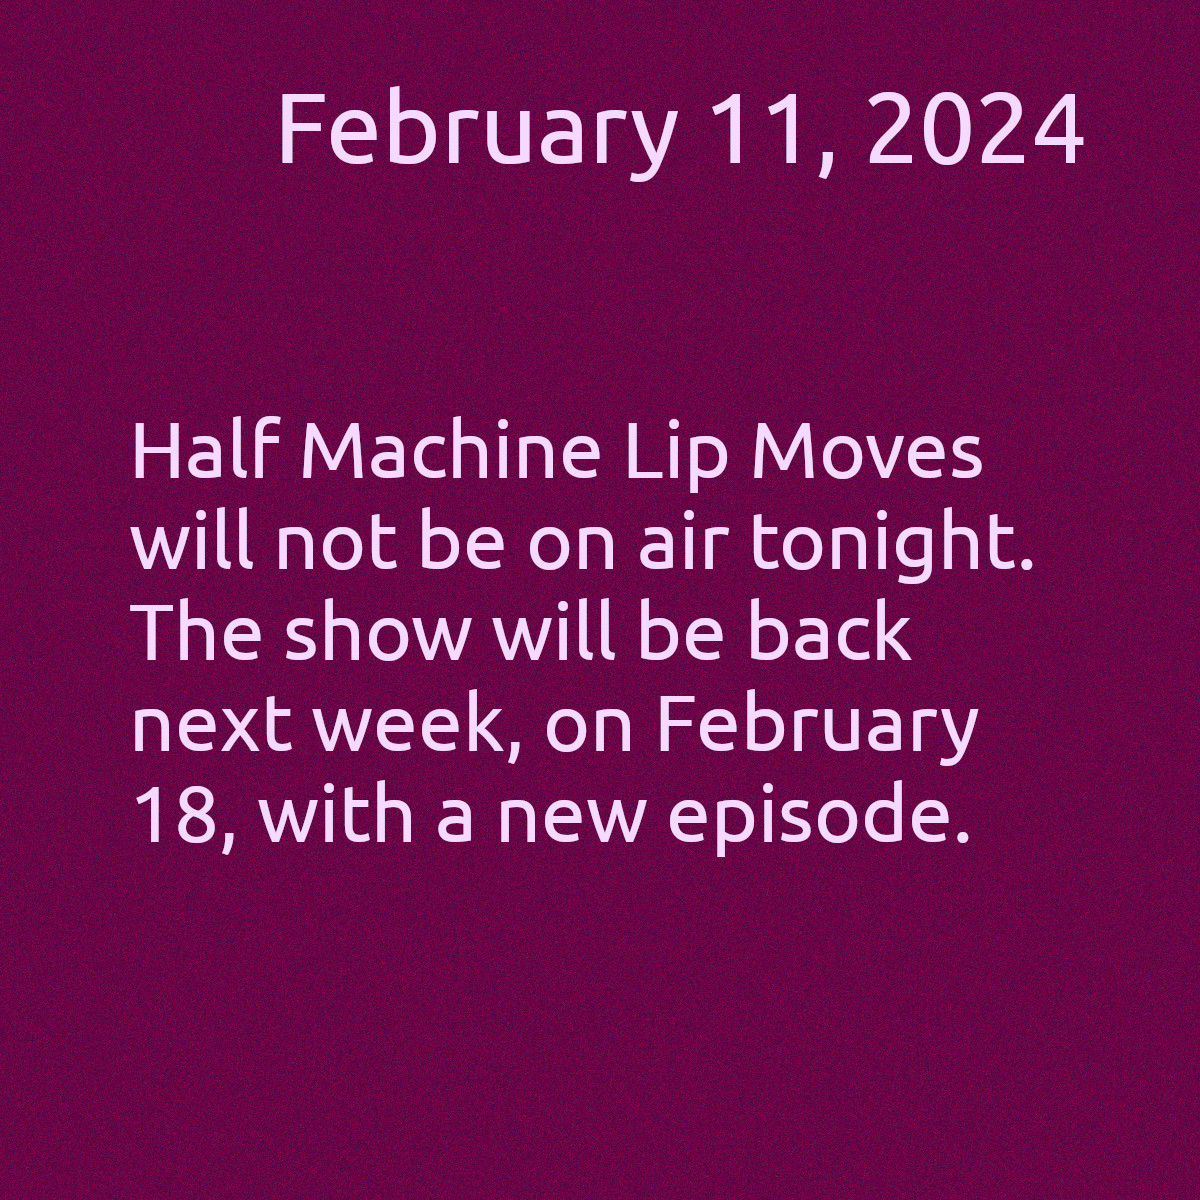 The image has a red background with white text. The text reads, &ldquo;February 11, 2024. Half Machine Lip Moves won&rsquo;t be on air tonight. The show will be back next week, on February 18, 2024 with a new episode.&rdquo;